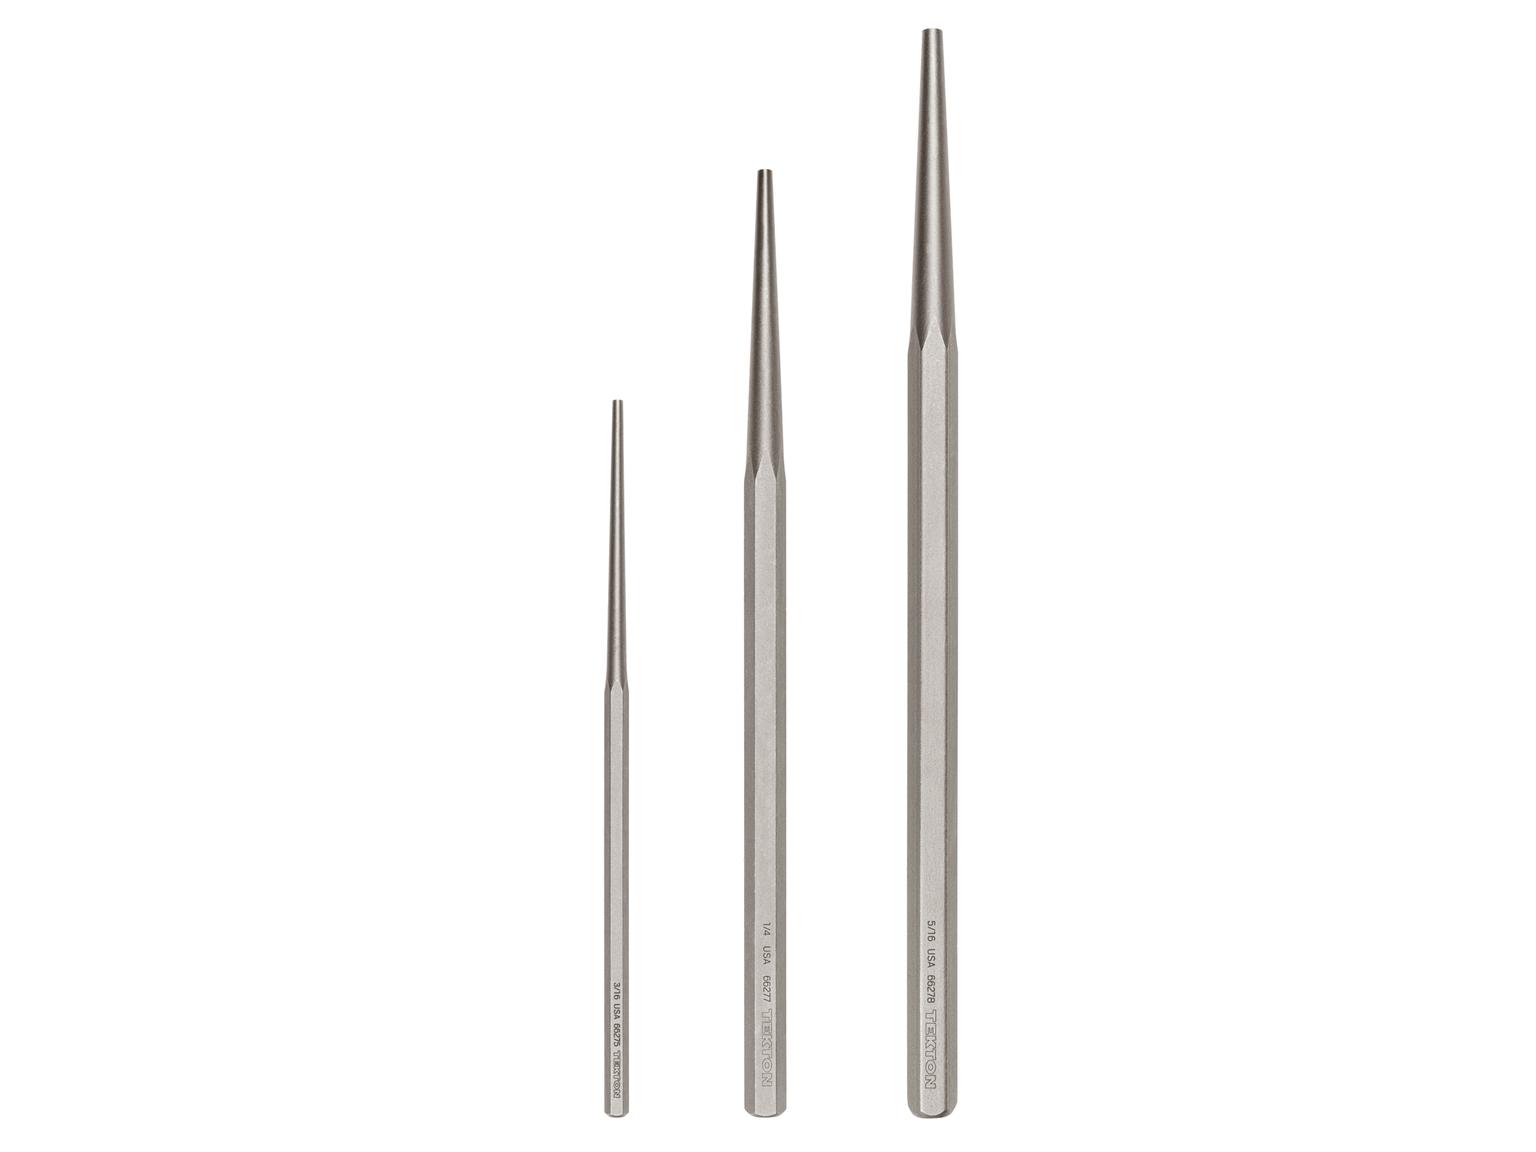 TEKTON 66556-T Long Alignment Punch Set, 3-Piece (3/16, 1/4, 5/16 in.)